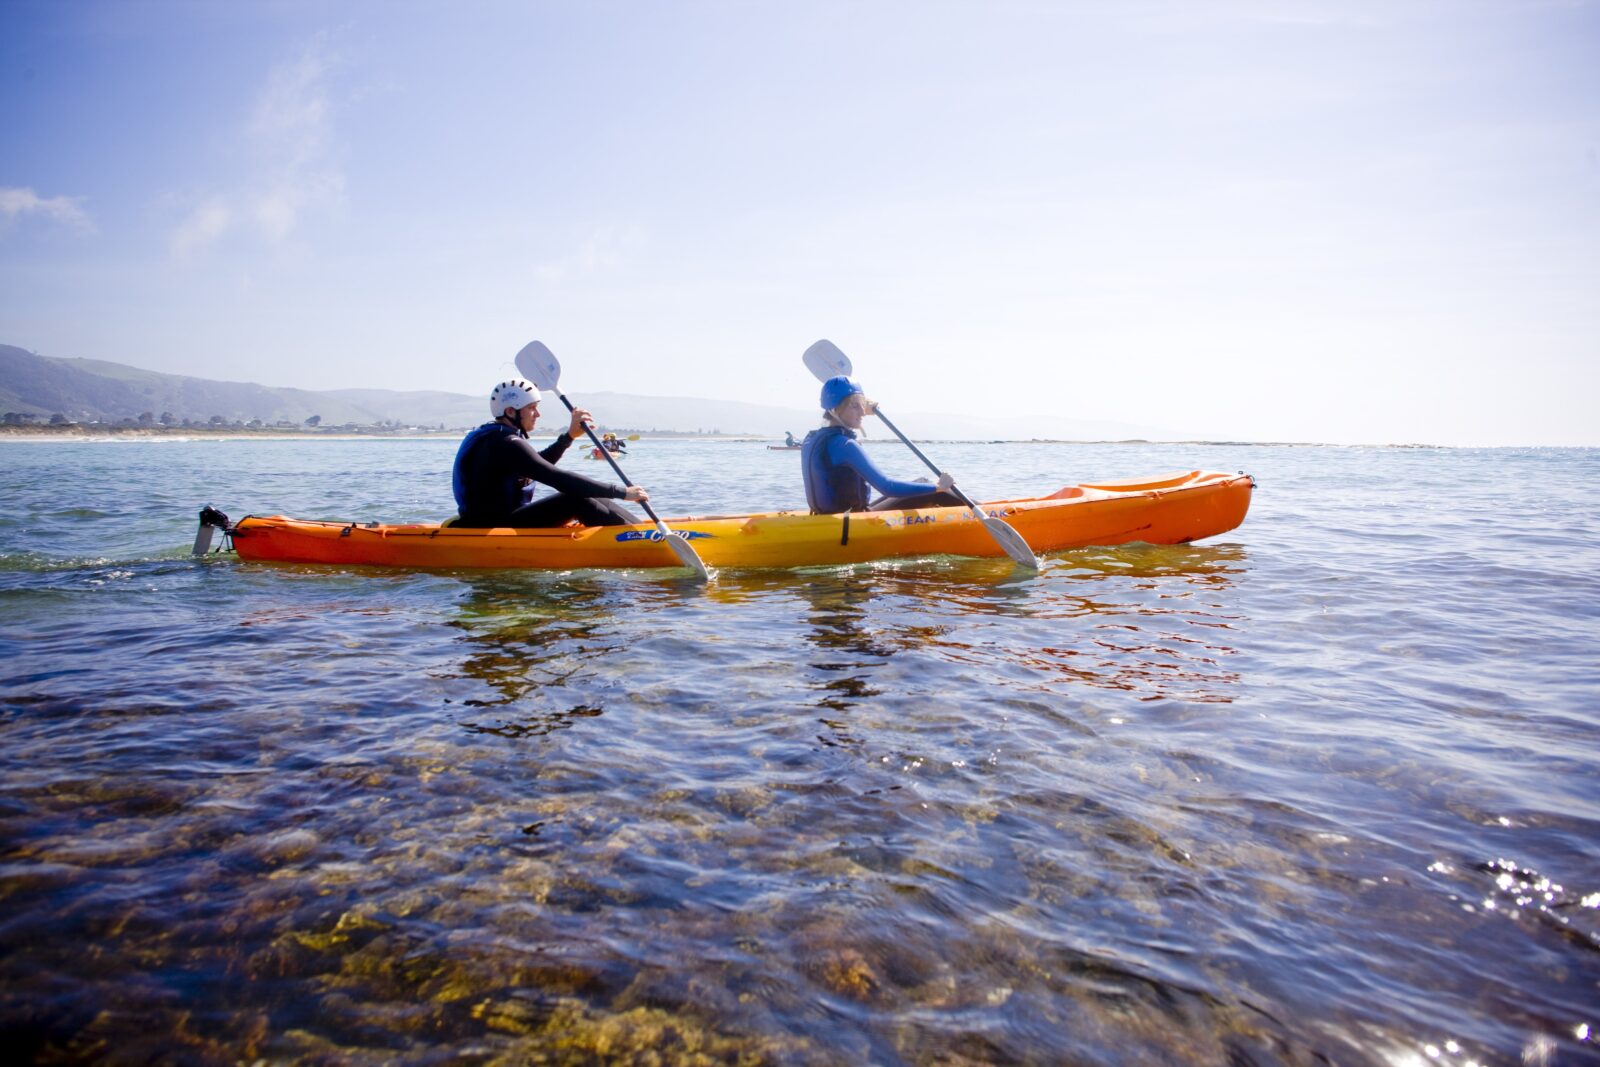 We offer sea kayaking as one of our wilderness adventures